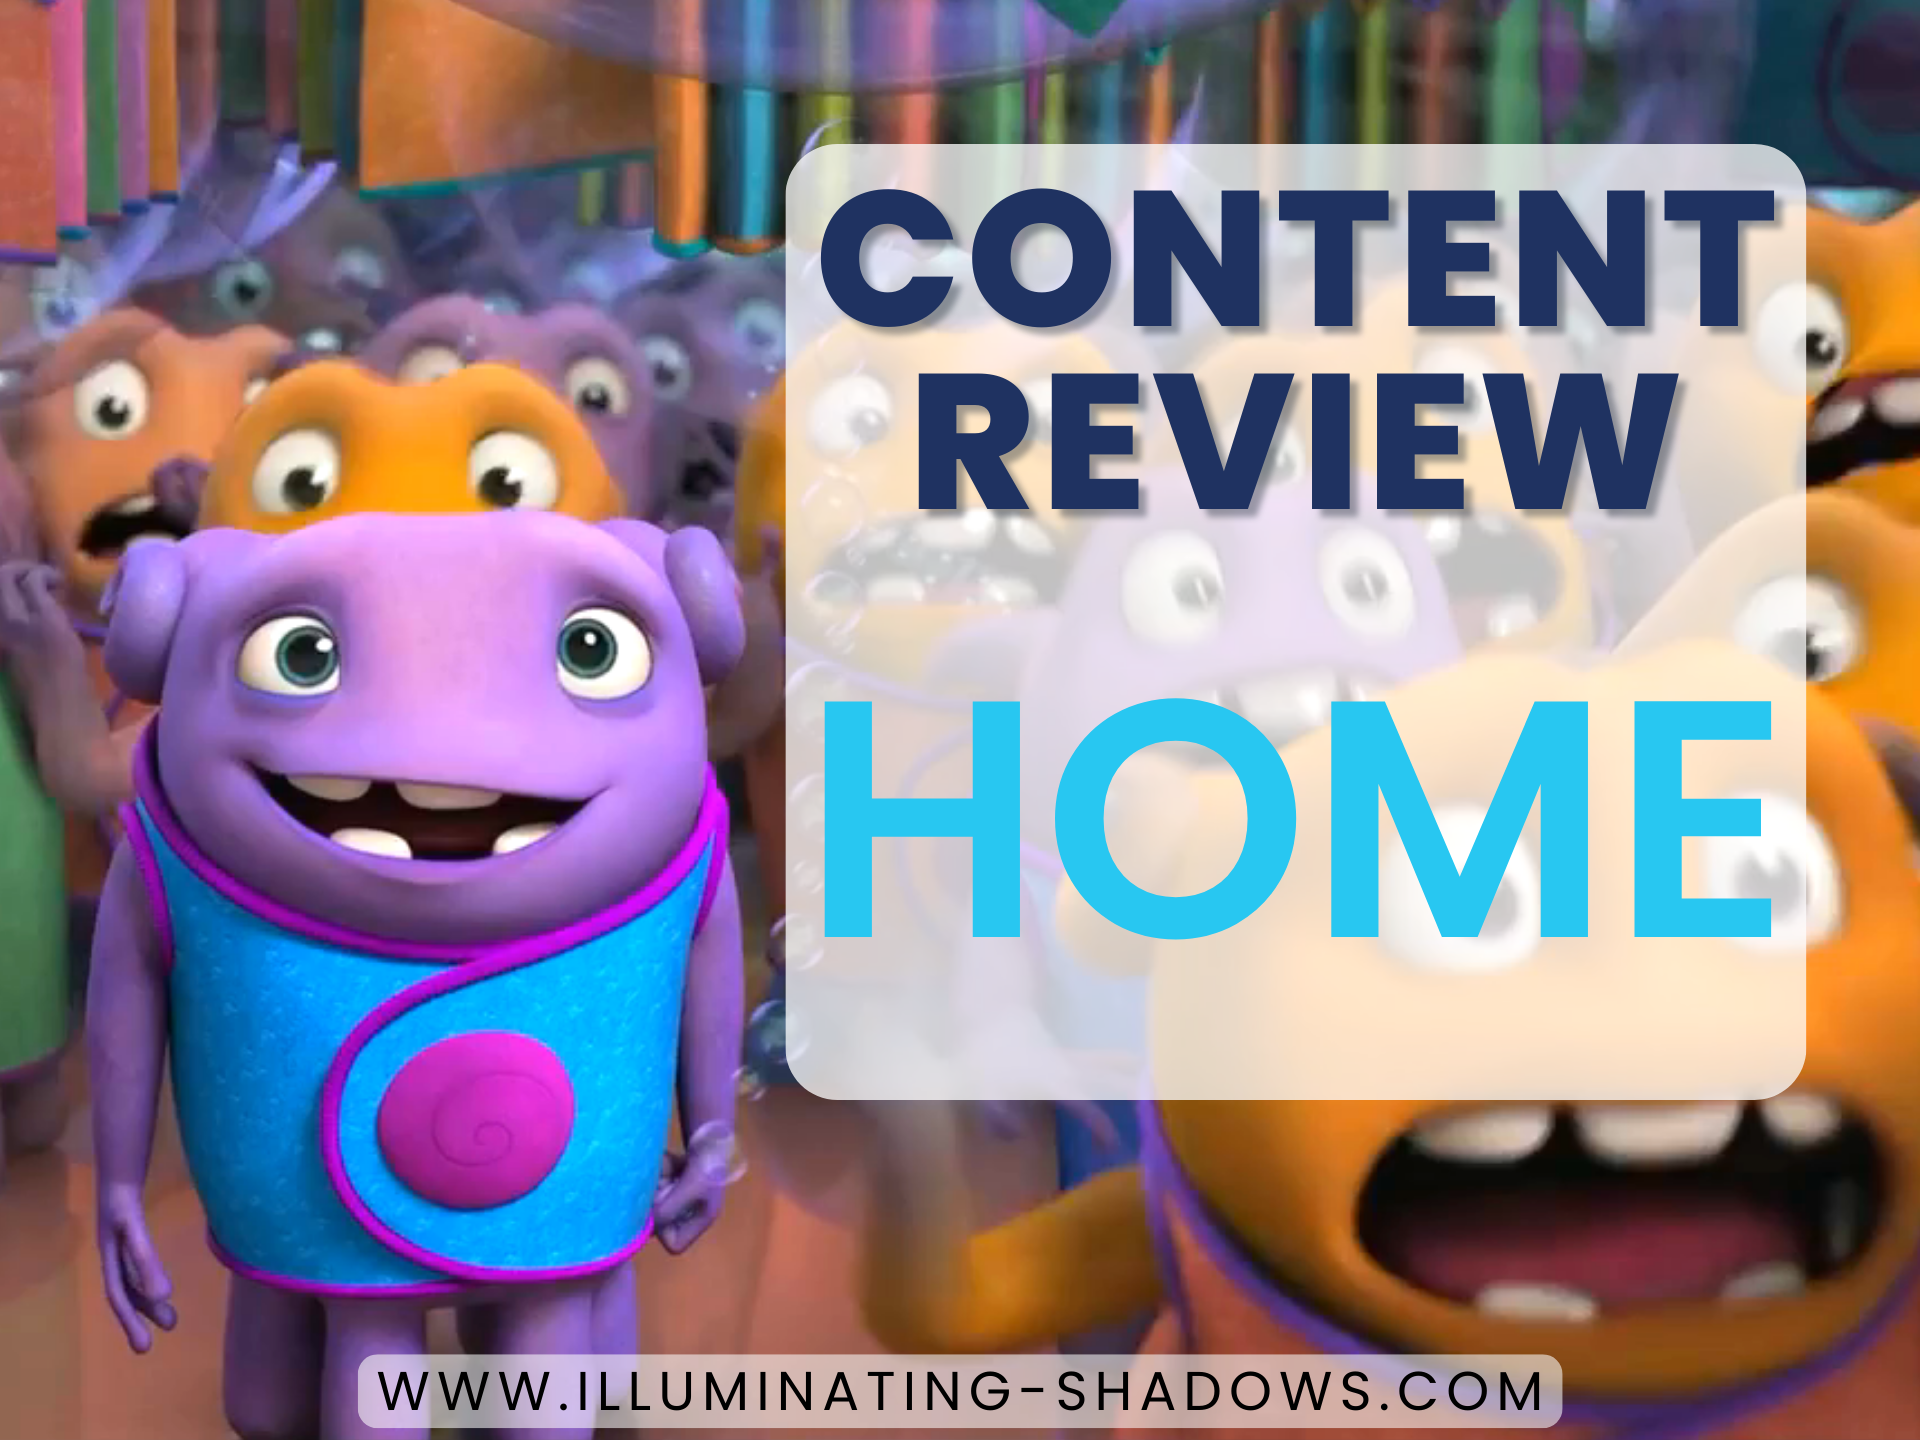 Home - Content Review